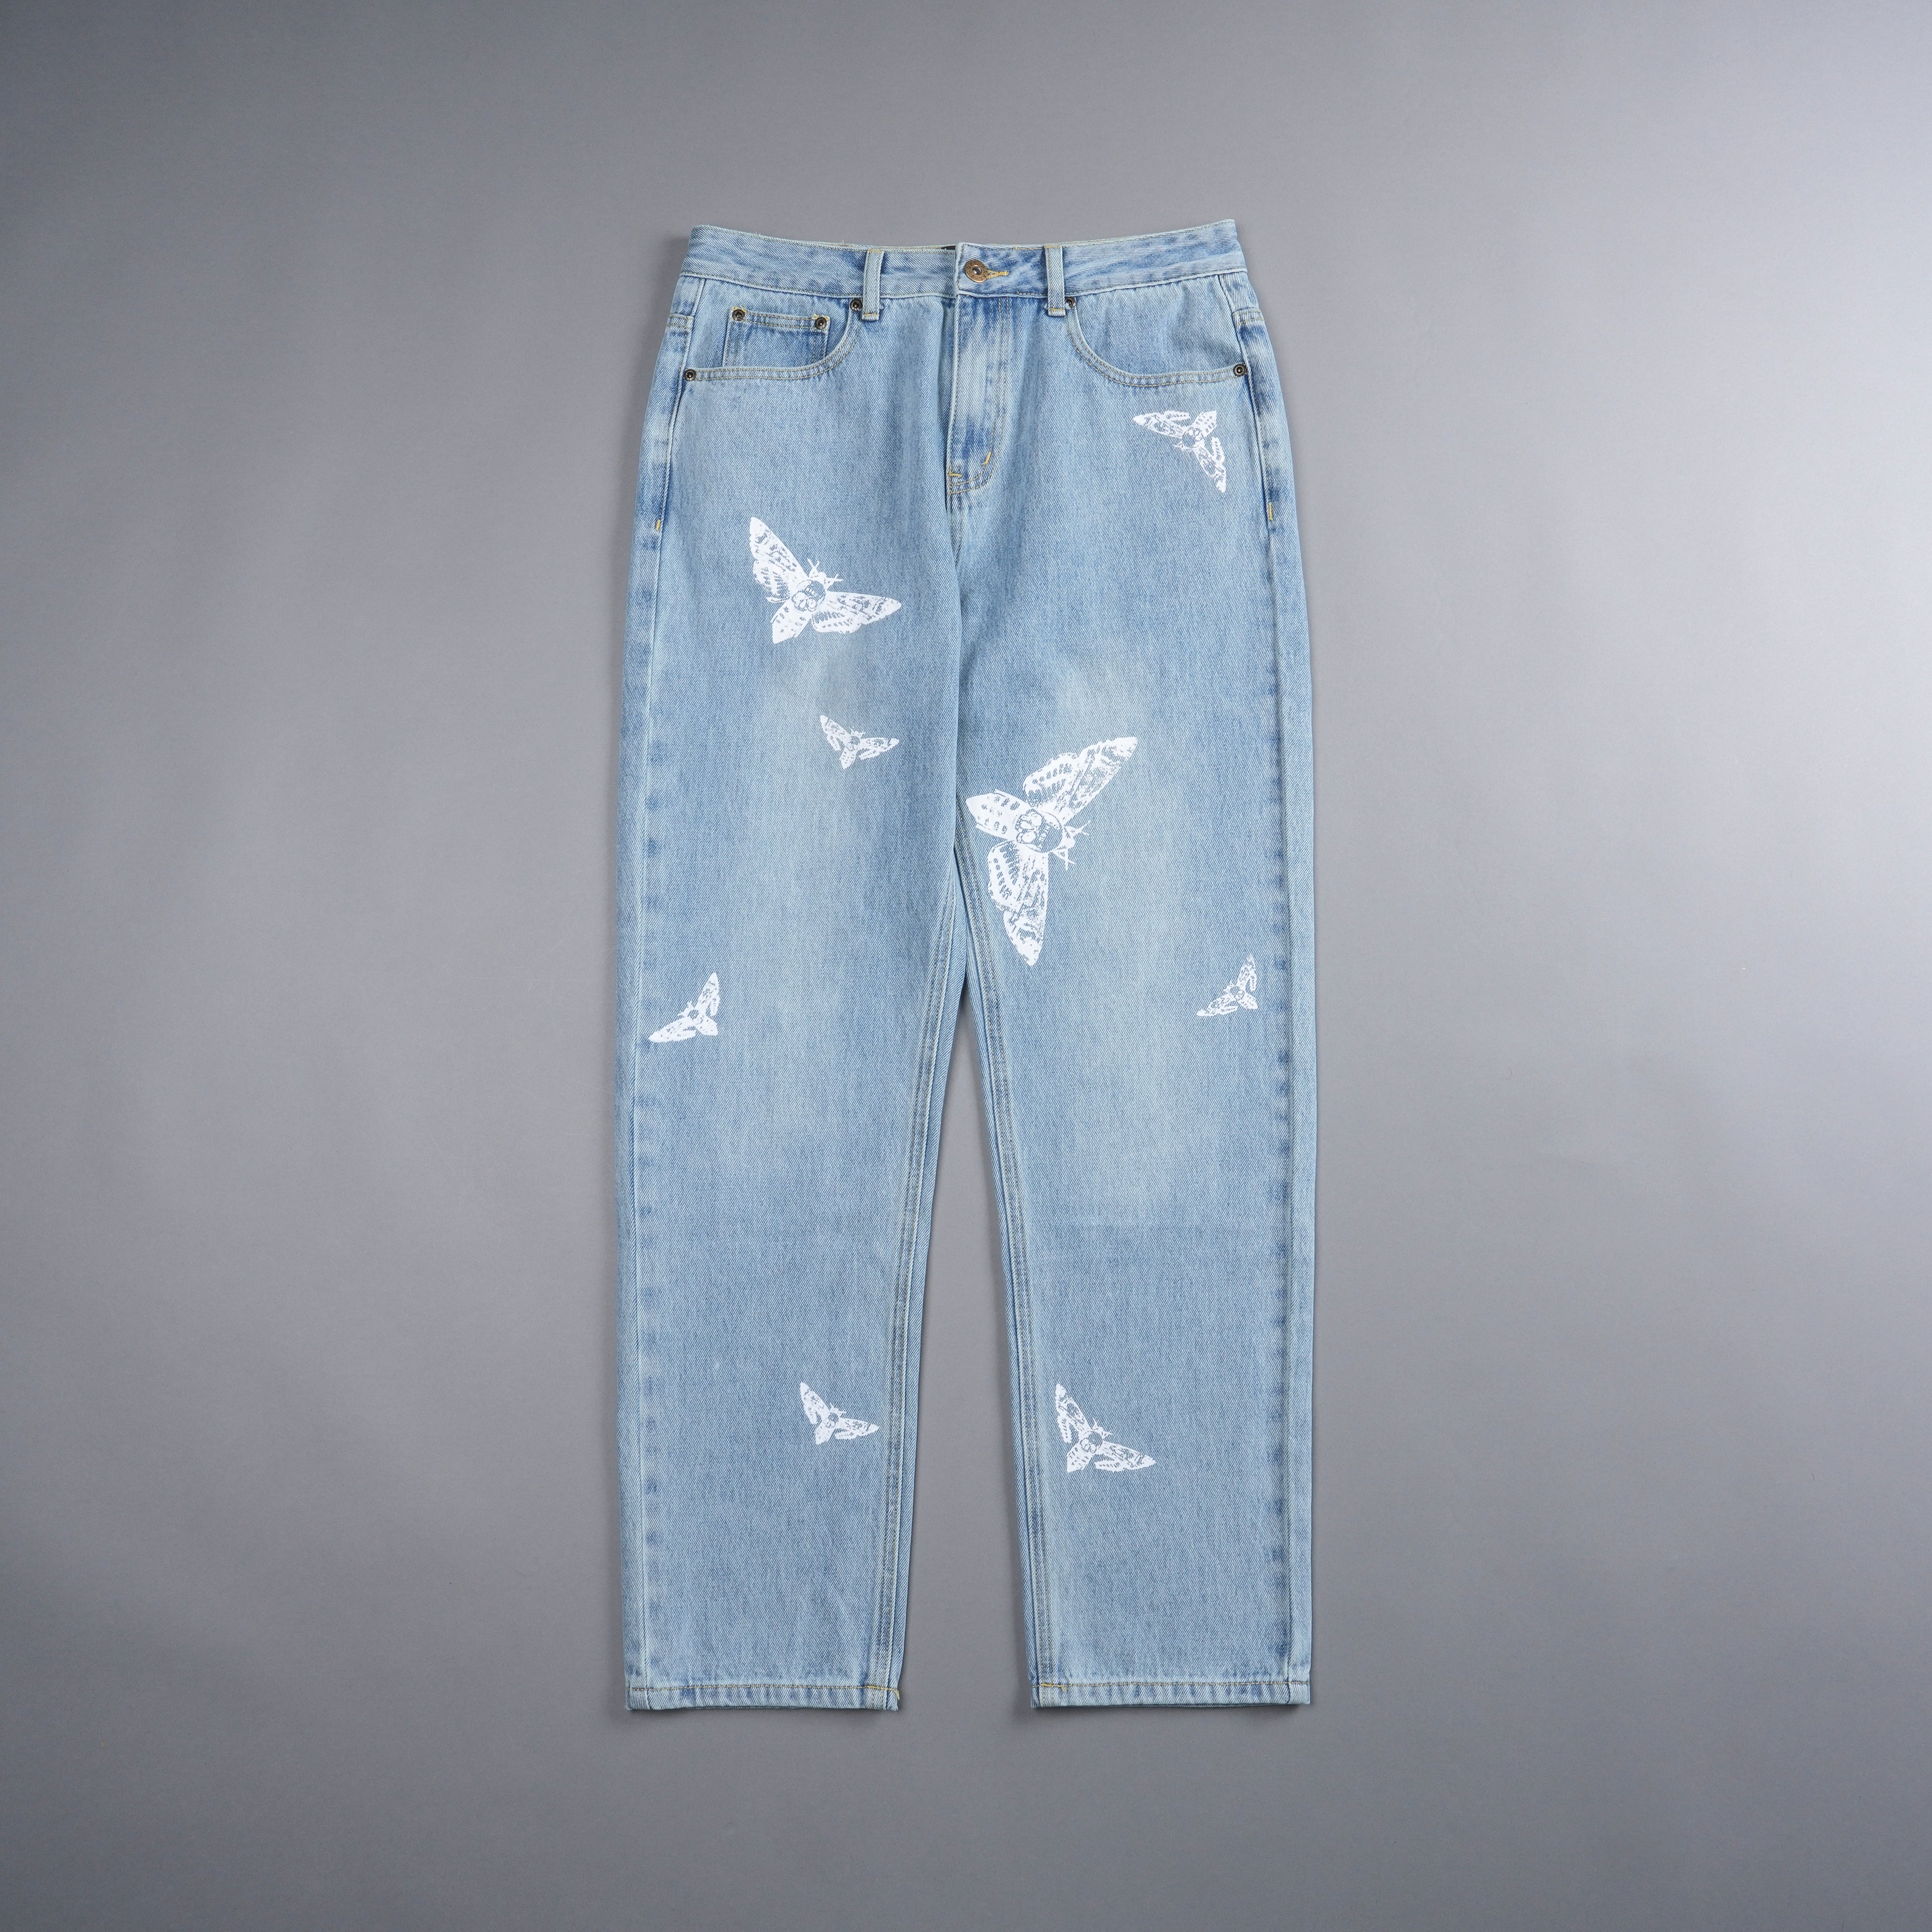 Fly With Us Campbell Denim Jeans in Medium Wash